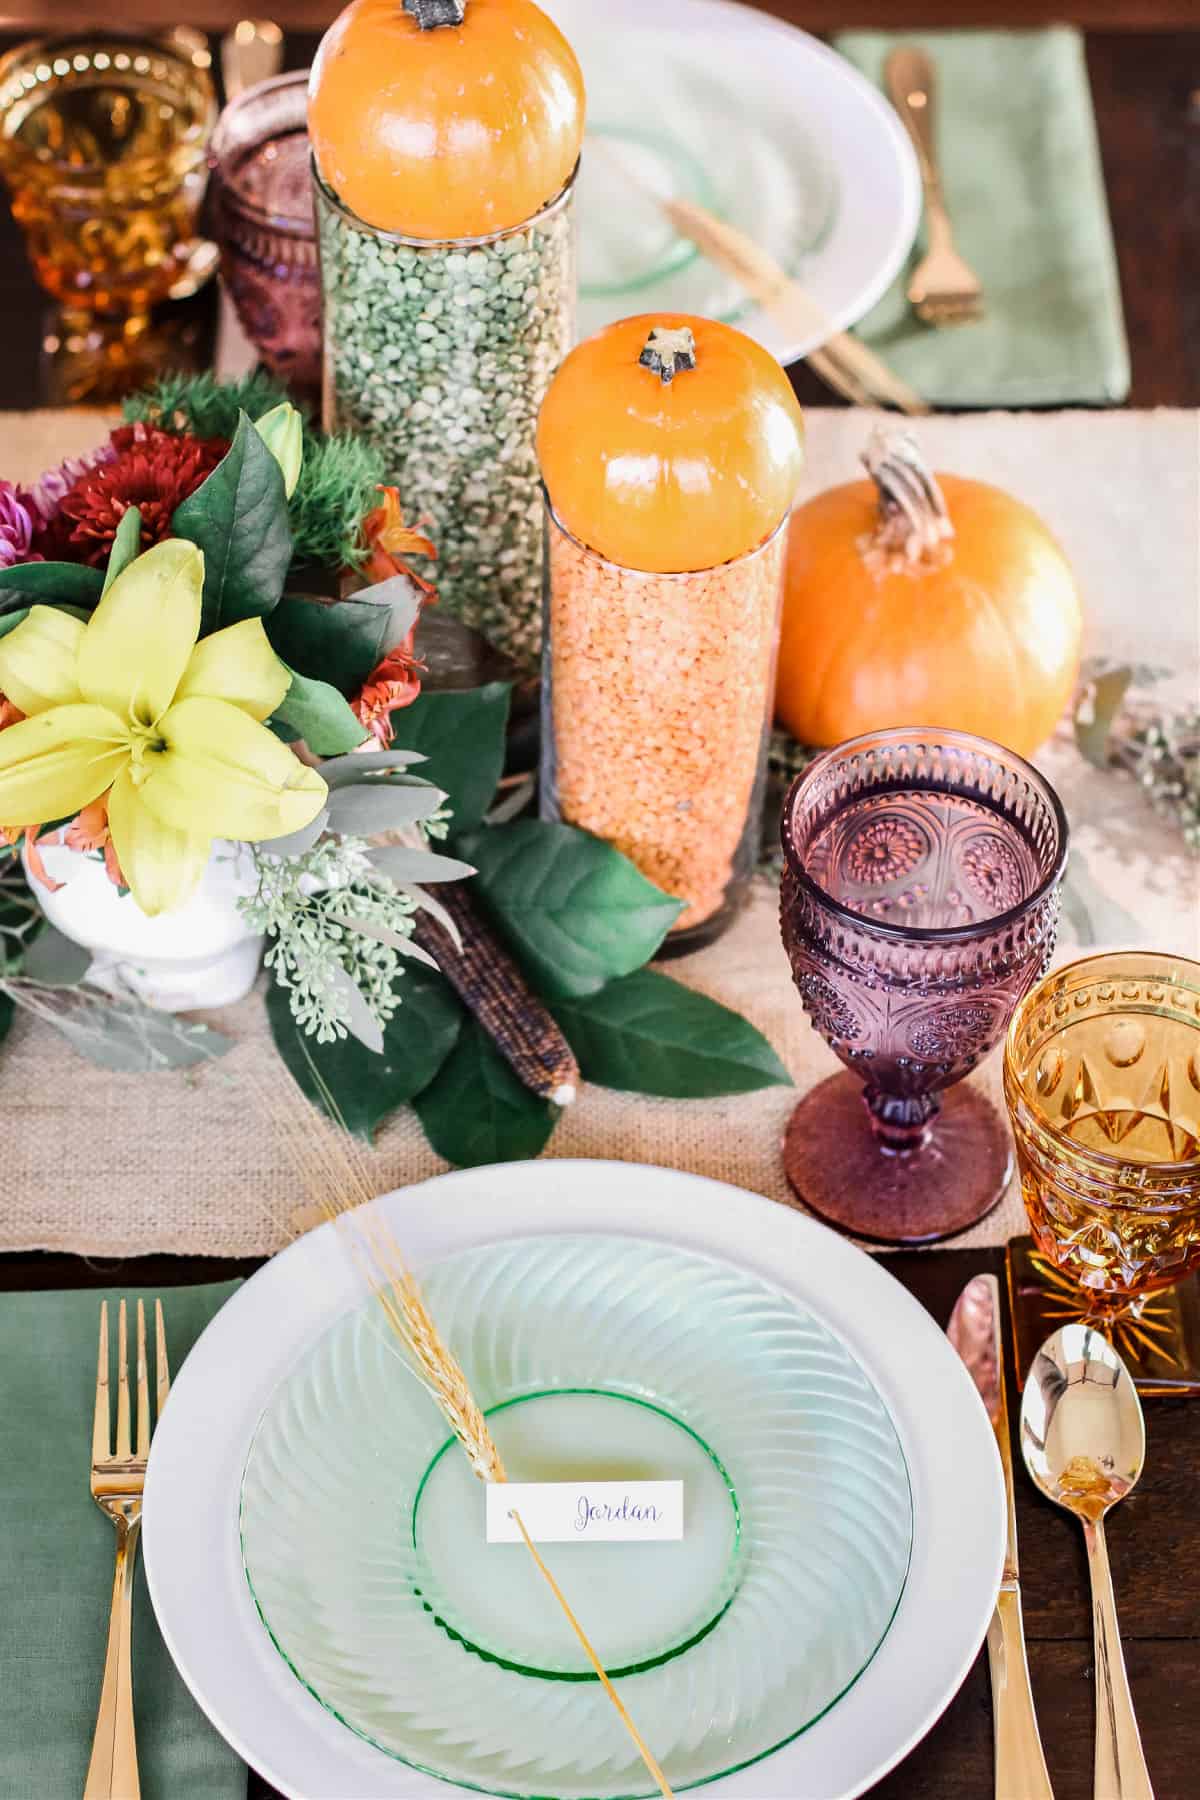 Thanksgiving place setting with green plate, and centerpiece of flowers and pumpkins